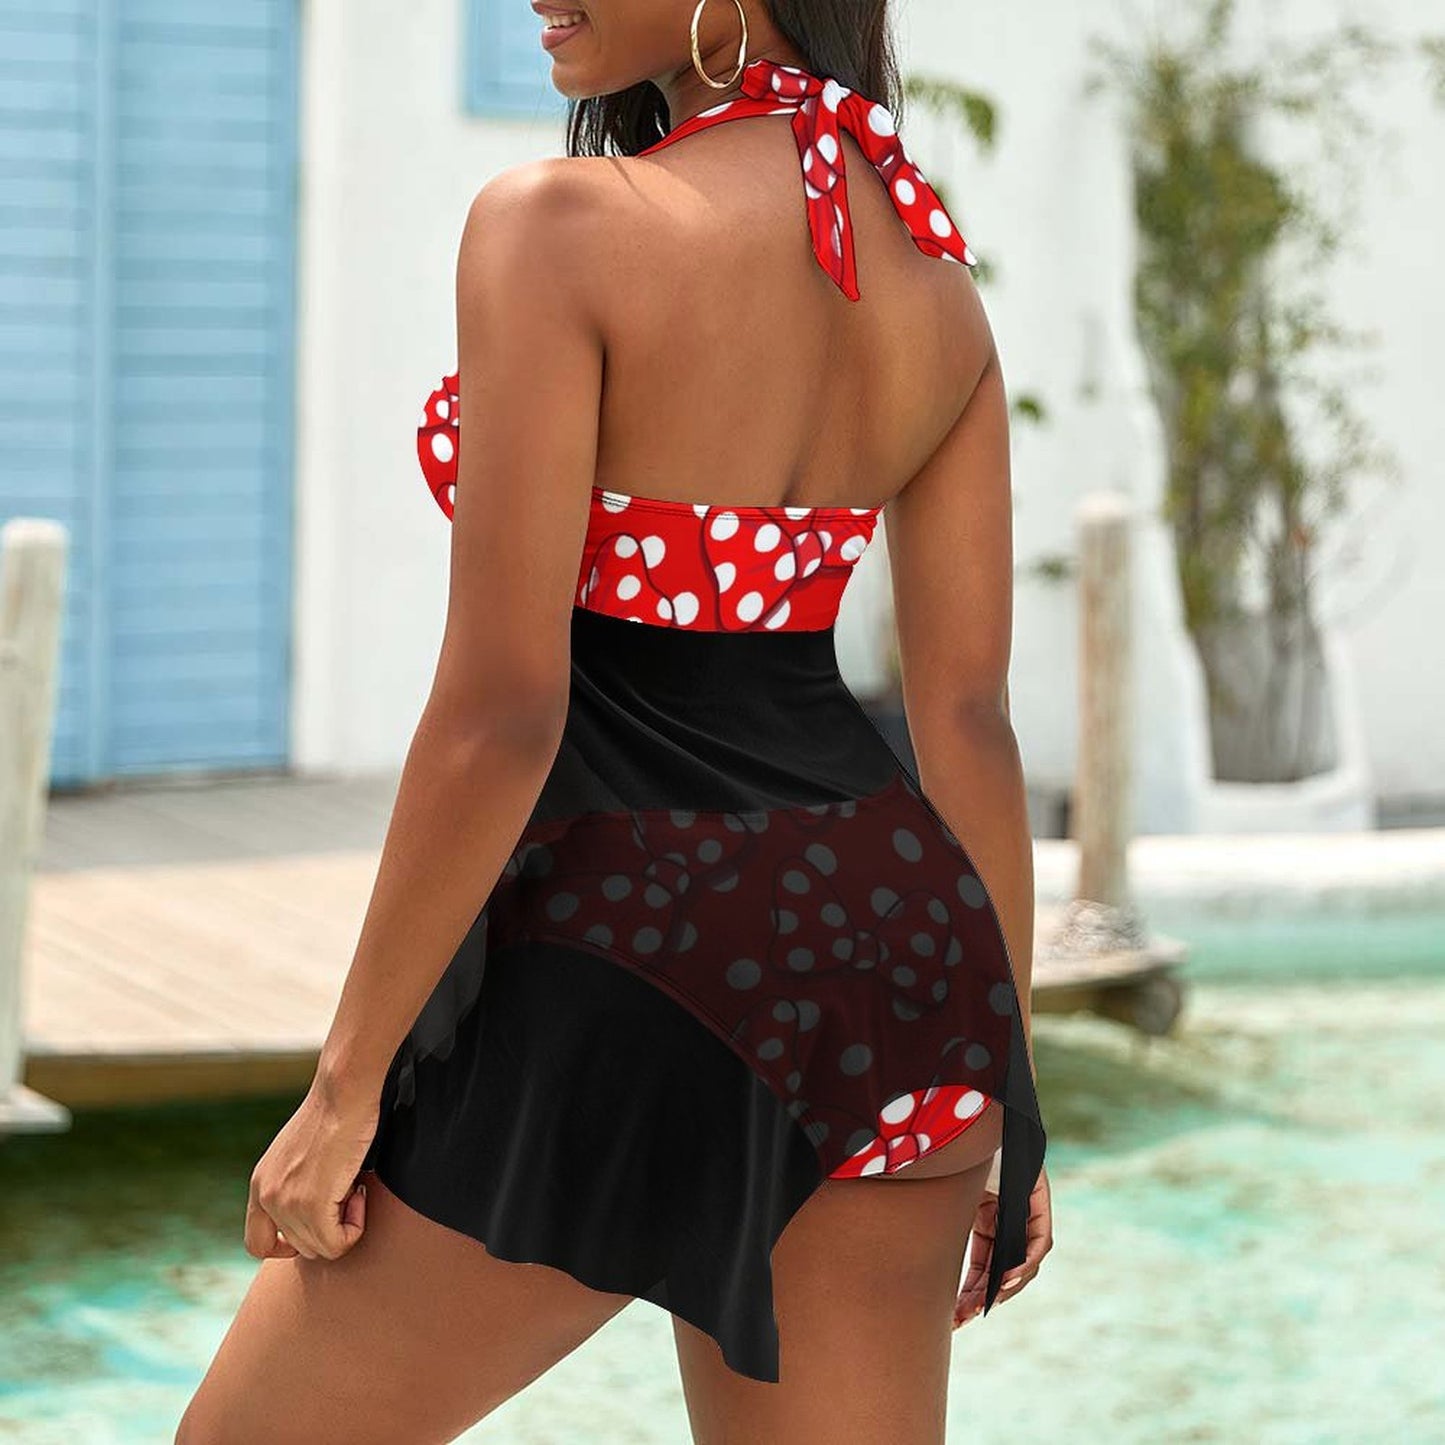 Red With White Polka Dot And Bows Women's Split Skirt Swimsuit